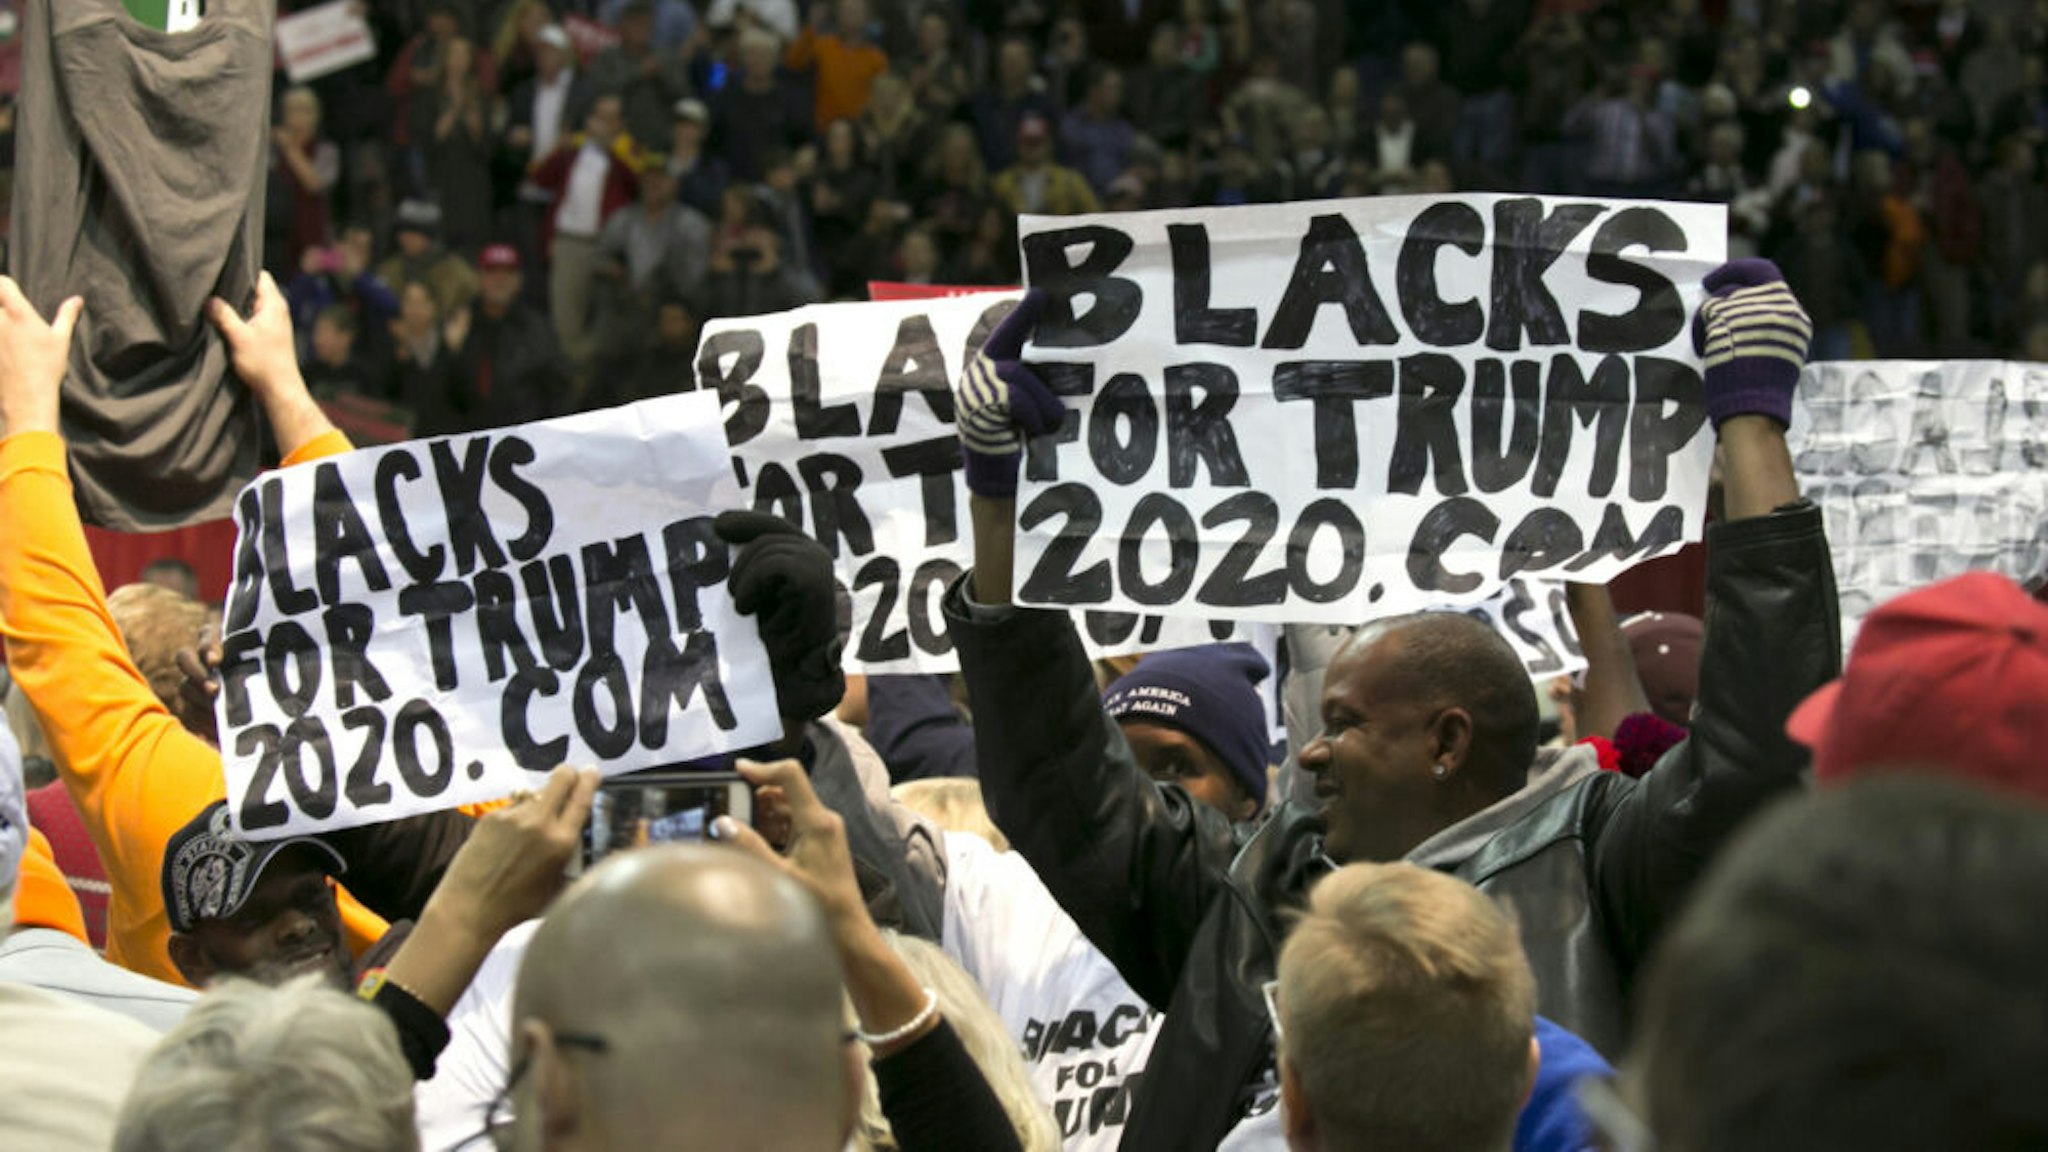 Attendees hold "Blacks For Trump" during a campaign rally with U.S. President Donald Trump in Pensacola, Florida, U.S., on Friday, Dec. 8, 2017. Trump gave his most full-throated endorsement yet of Alabama Senate candidate Roy Moore, casting aside calls for to shun the former judge whos been accused of sexual misconduct while seizing on reports that questioned the credibility of his accuser.